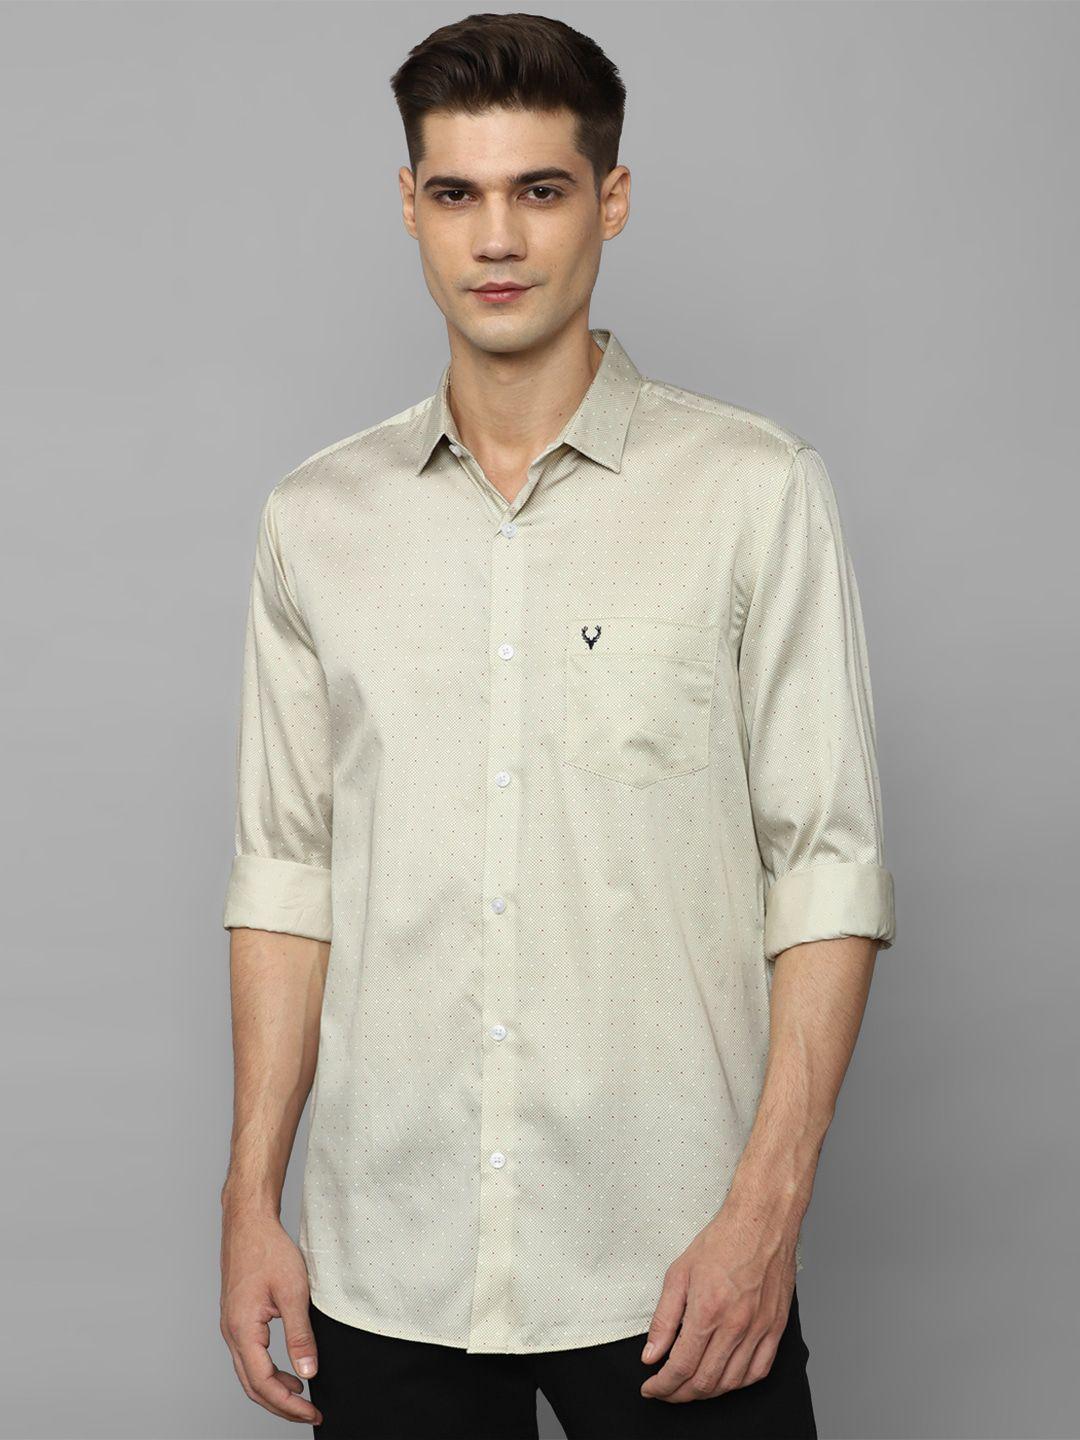 allen solly slim fit polka dot printed pure cotton casual shirt